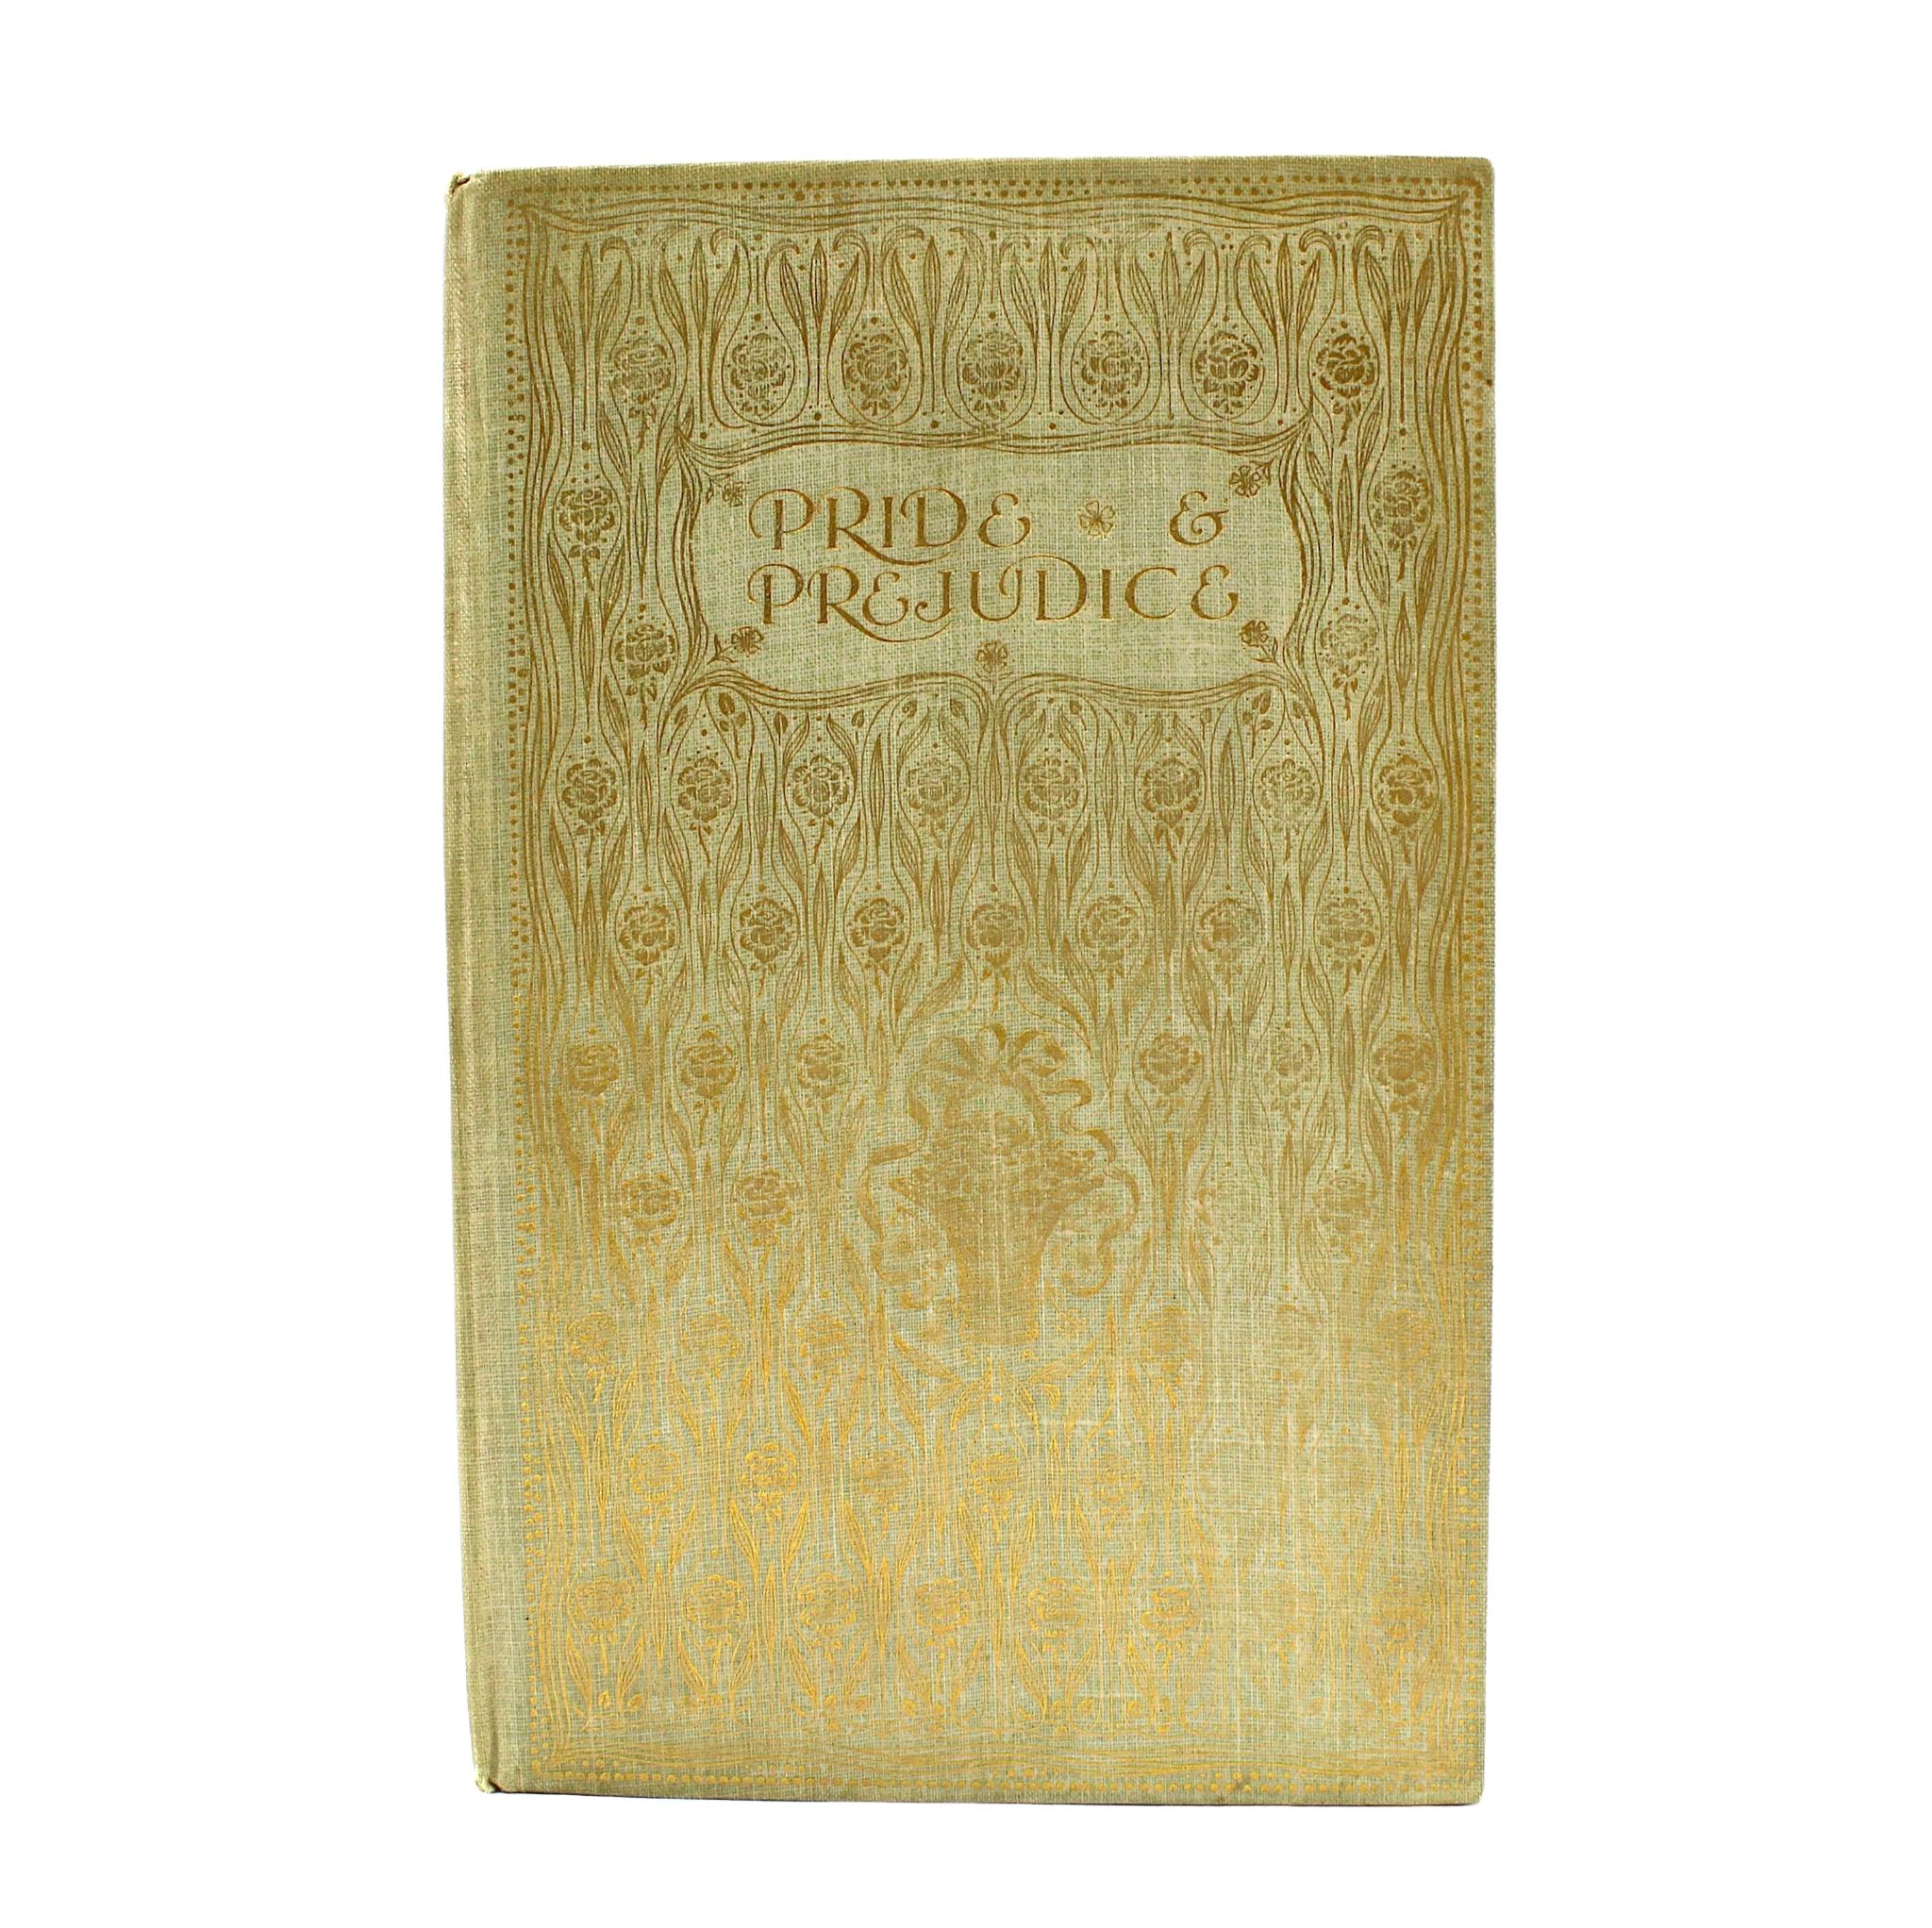 Austen, Jane. Pride & Prejudice. London and New York: J. M. Dent & Co., E.P. Dutton & Co., 1907. Octavo. In original pictorial pale green cloth boards, stamped in gilt. Illustrated with 24 color plates by C. E. Brock. Presented with a new archival